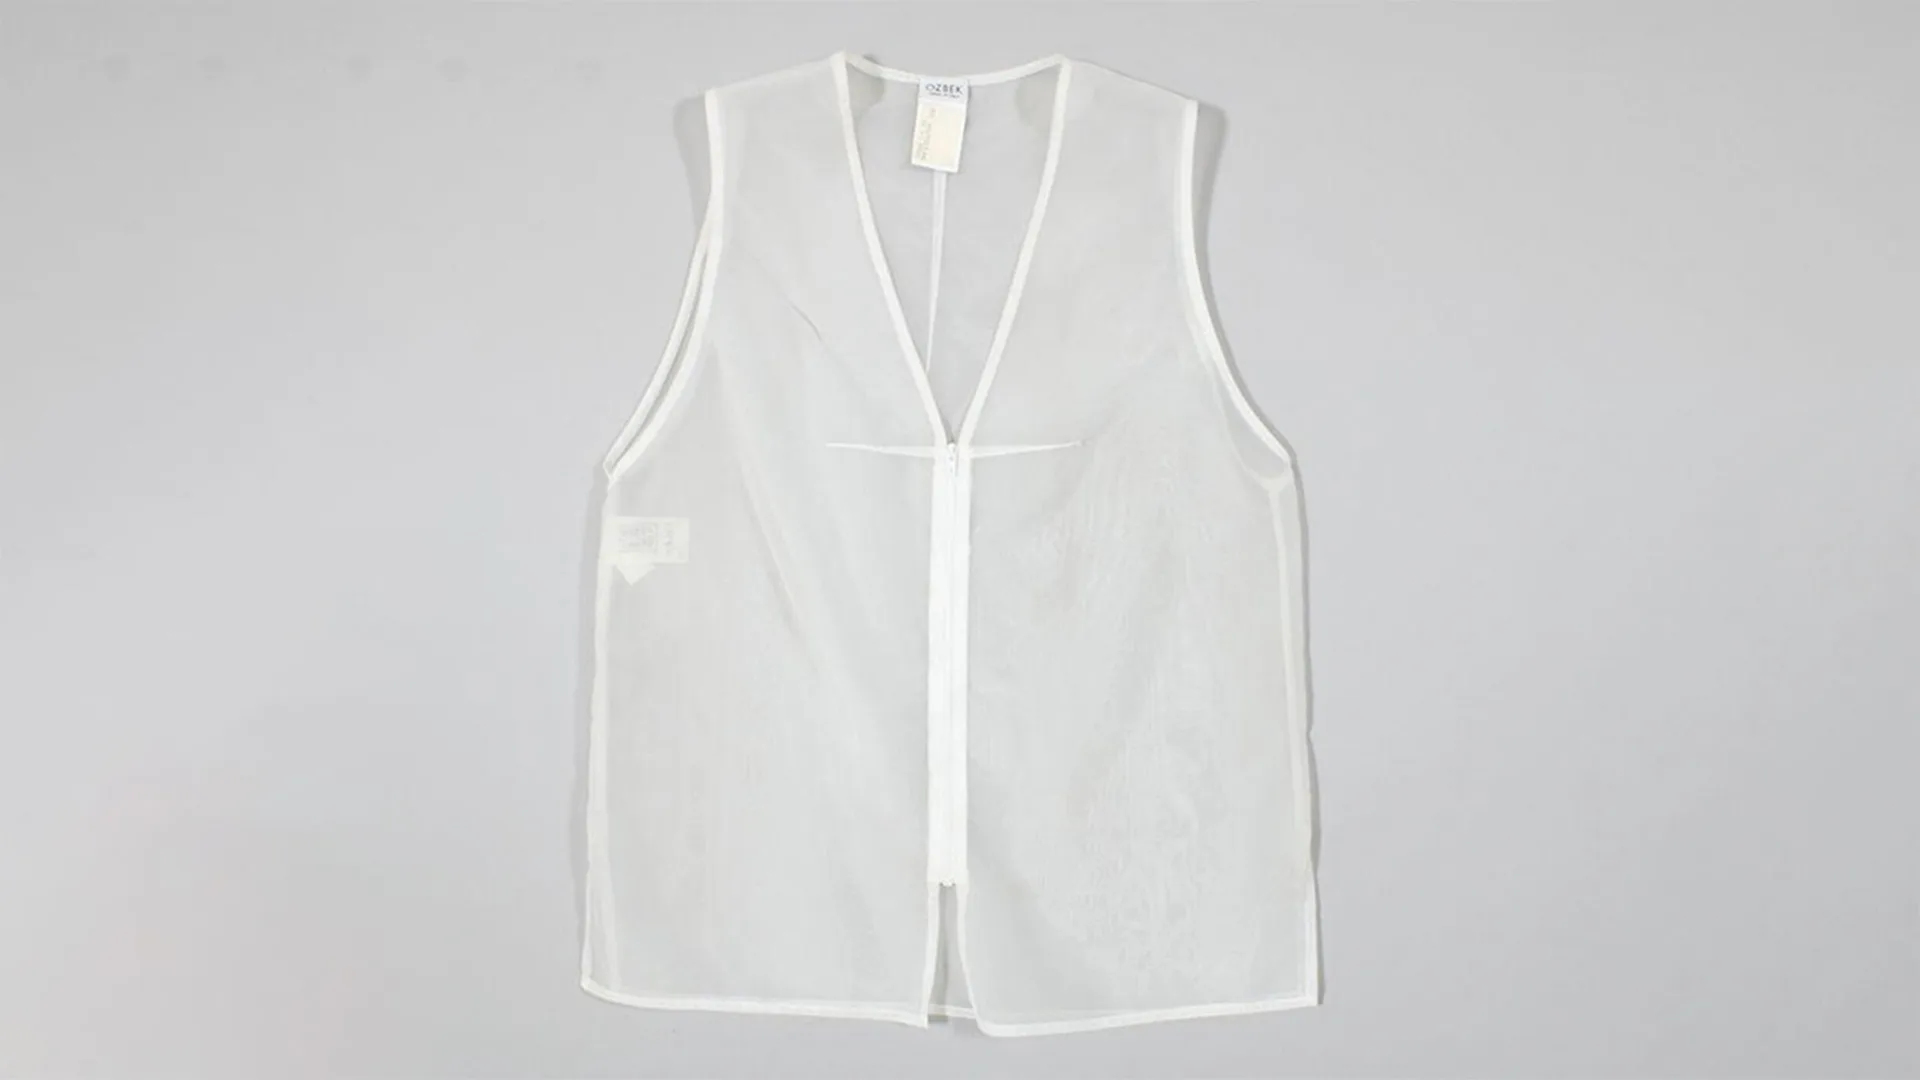 A polyamide vest top with a zip down the front